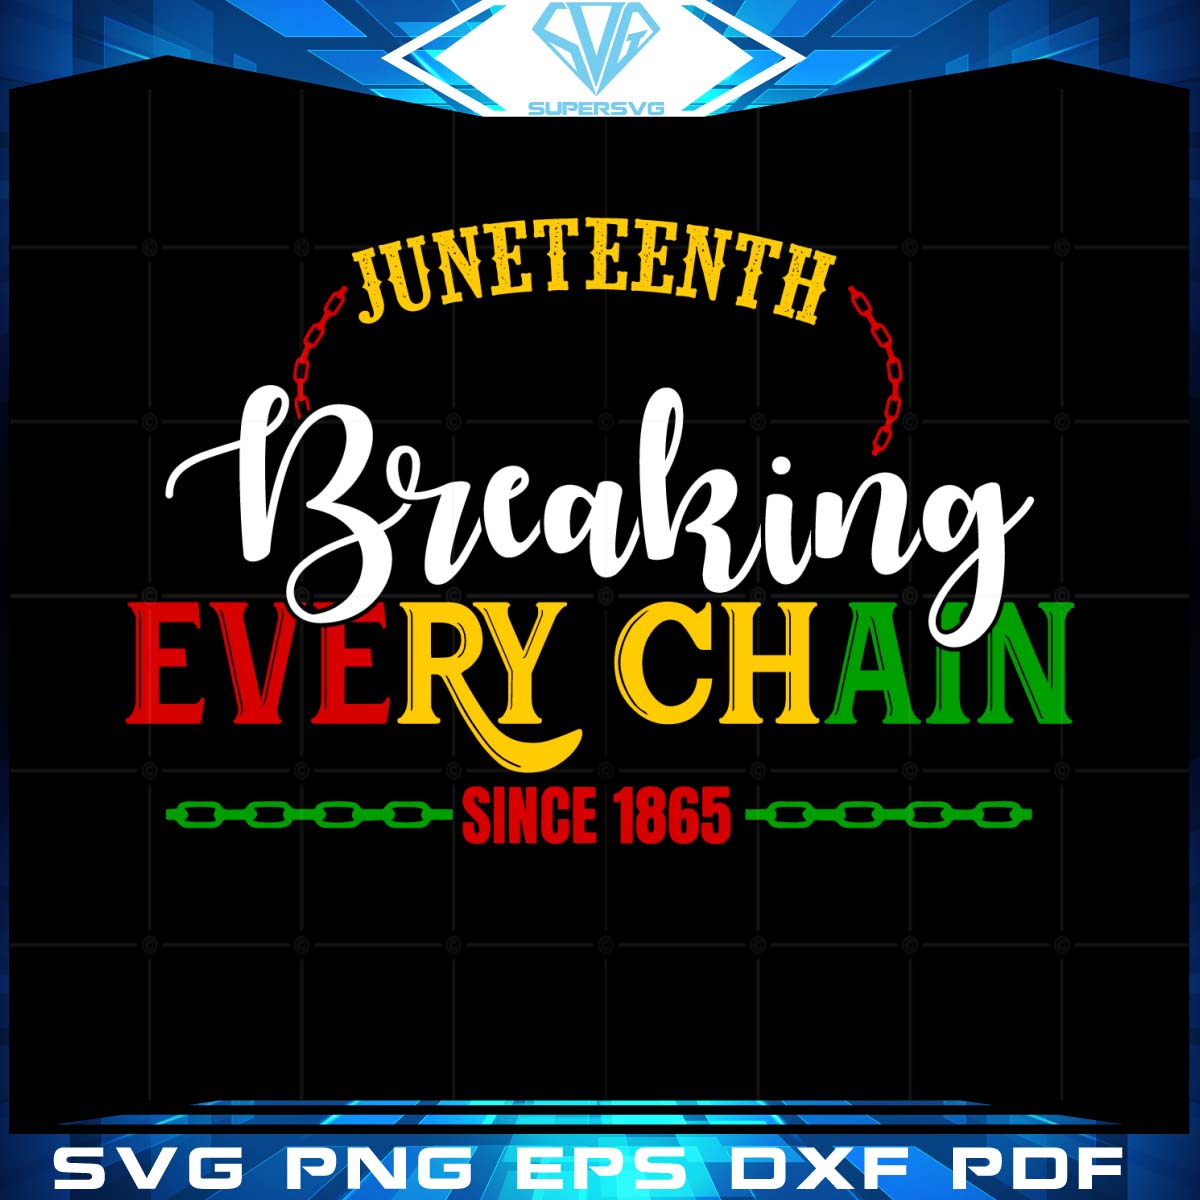 Juneteenth Breaking Every Chain Since 1865 Svg, Juneteenth Svg